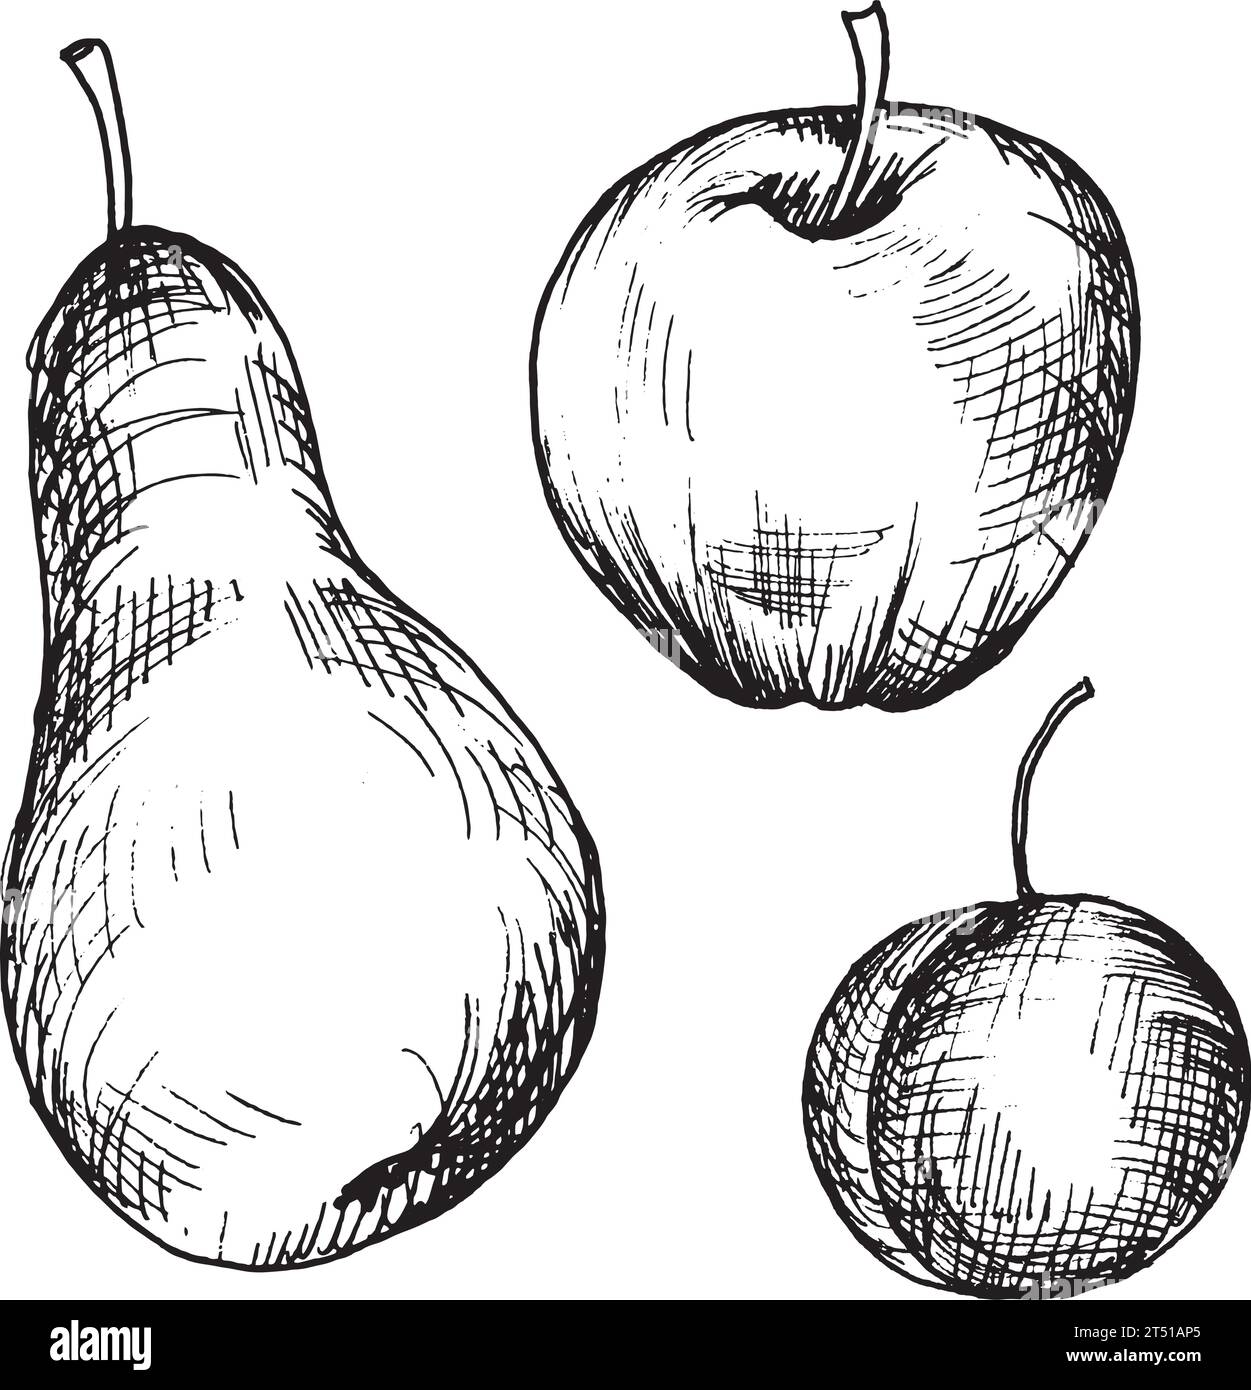 Vector graphic illustration of hand drawn plum,apple, pear. Black and white drawing of plum. Stock Vector